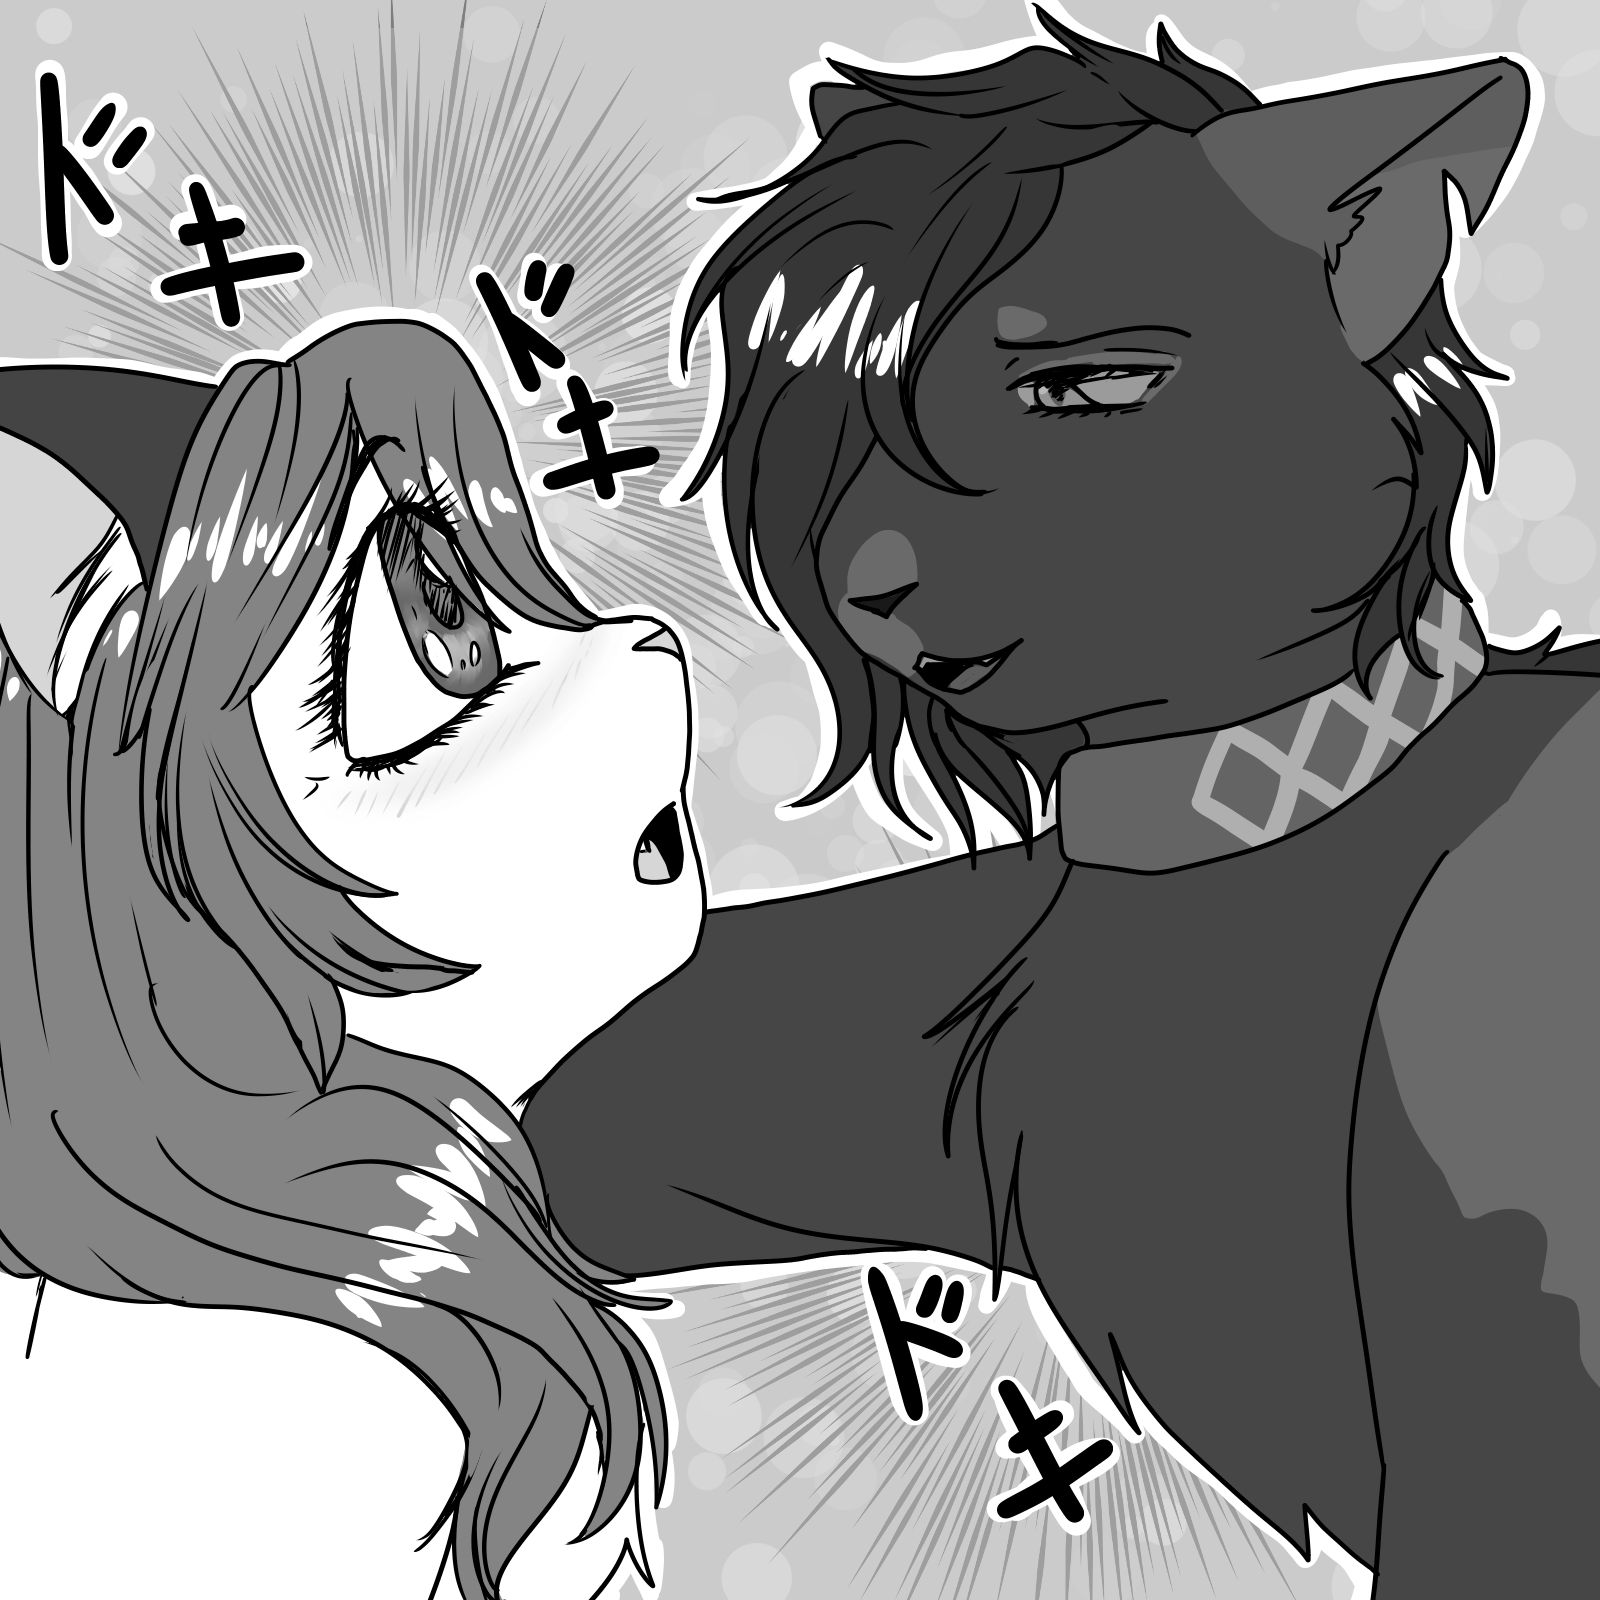 Exwife and Blubberspine in a faux shojo manga style in monochrome. Exwife is blushing hard as he pulls a kabedon. They're surrounded by Doki Doki kanji